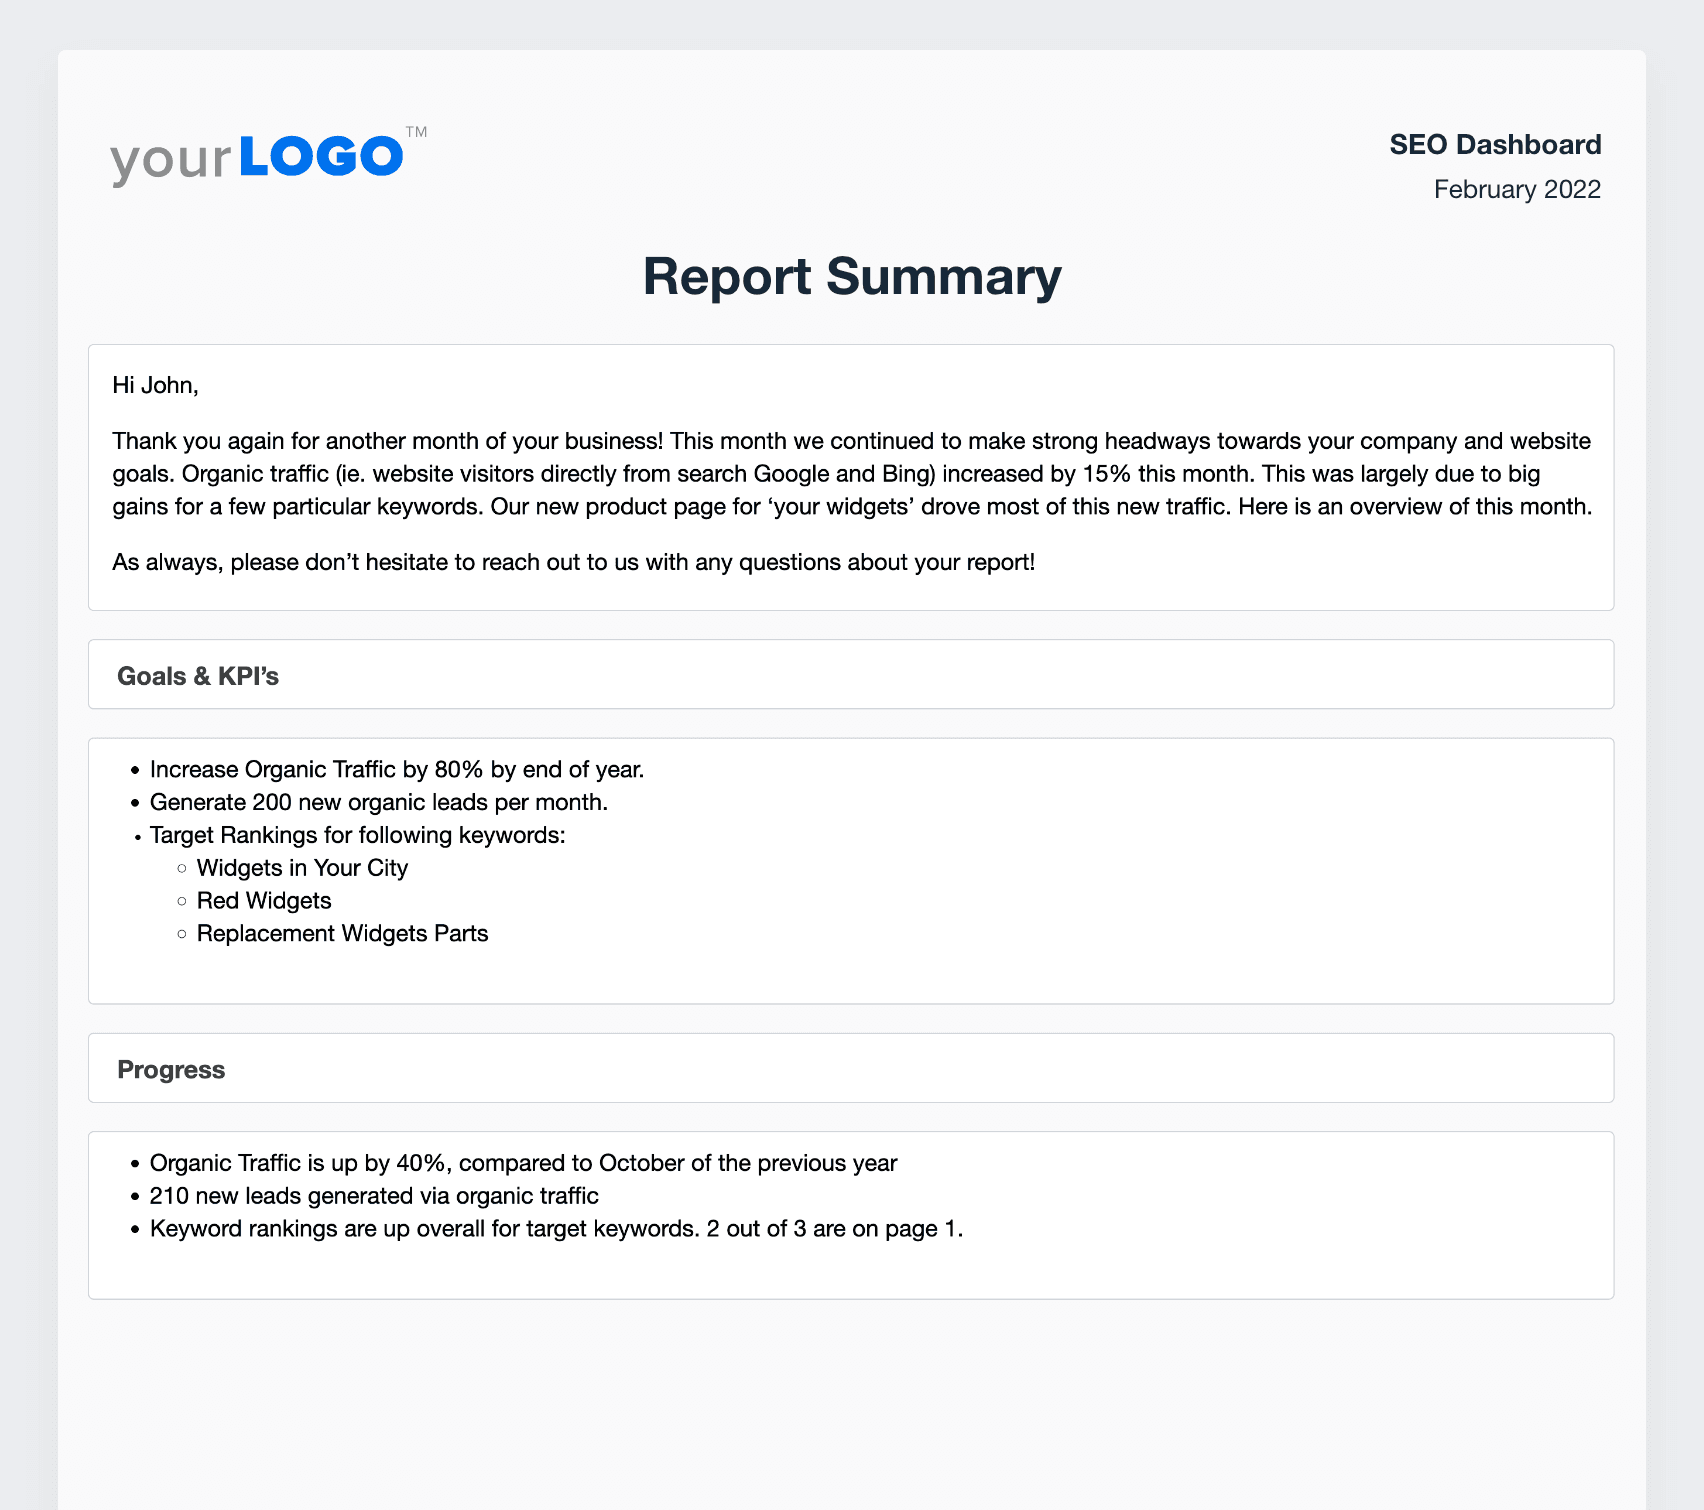 A screenshot of the Report Summary from the SEO Report Template